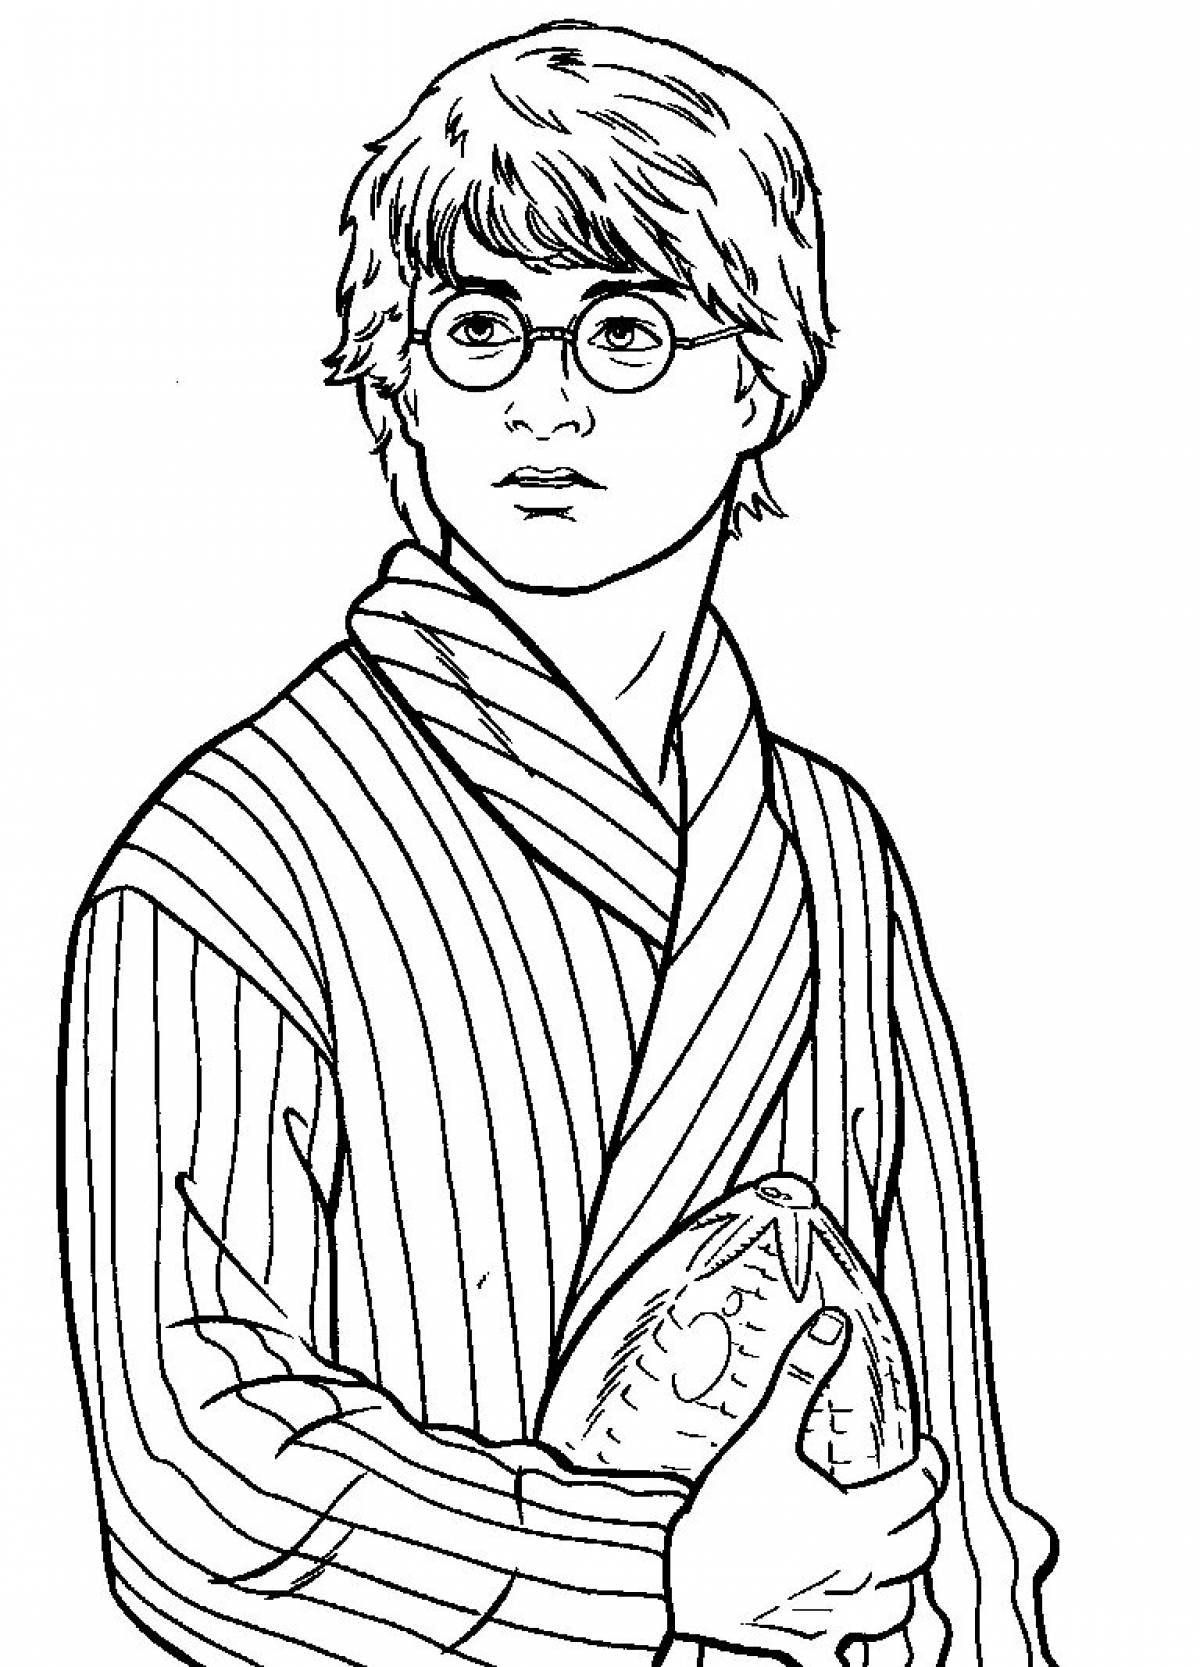 Harry potter drawing #8